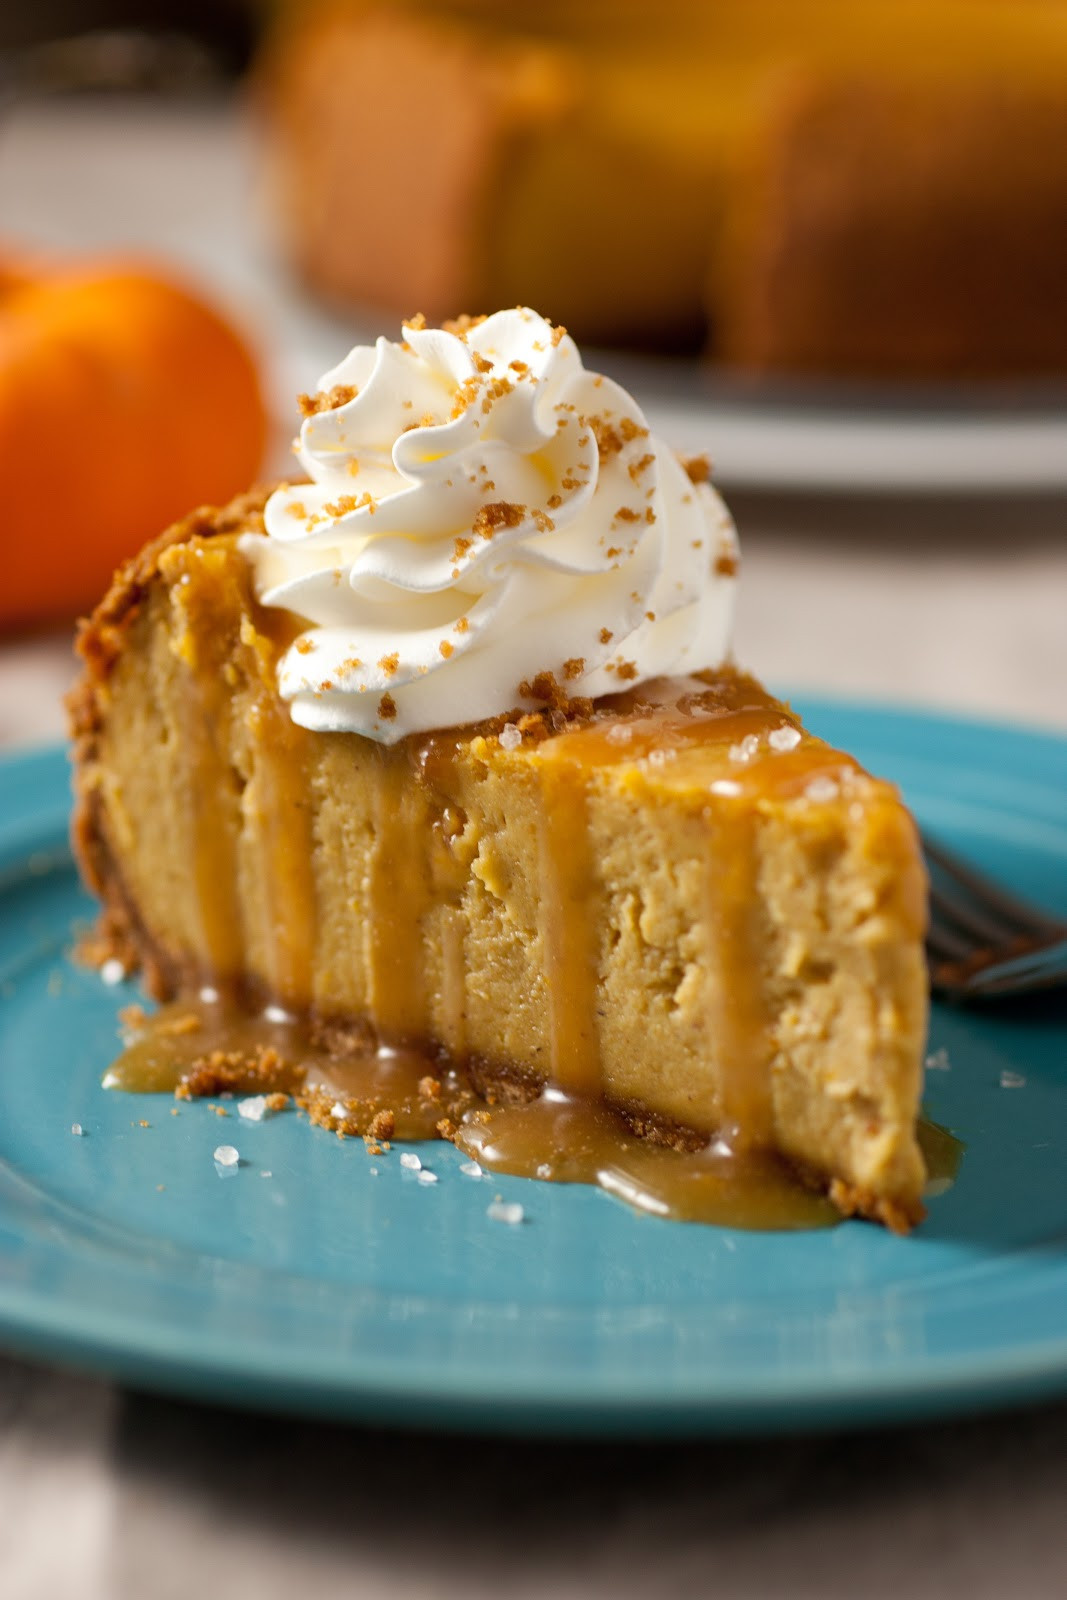 Recipe For Pumpkin Cheesecake
 October 21 is National Pumpkin Cheesecake Day